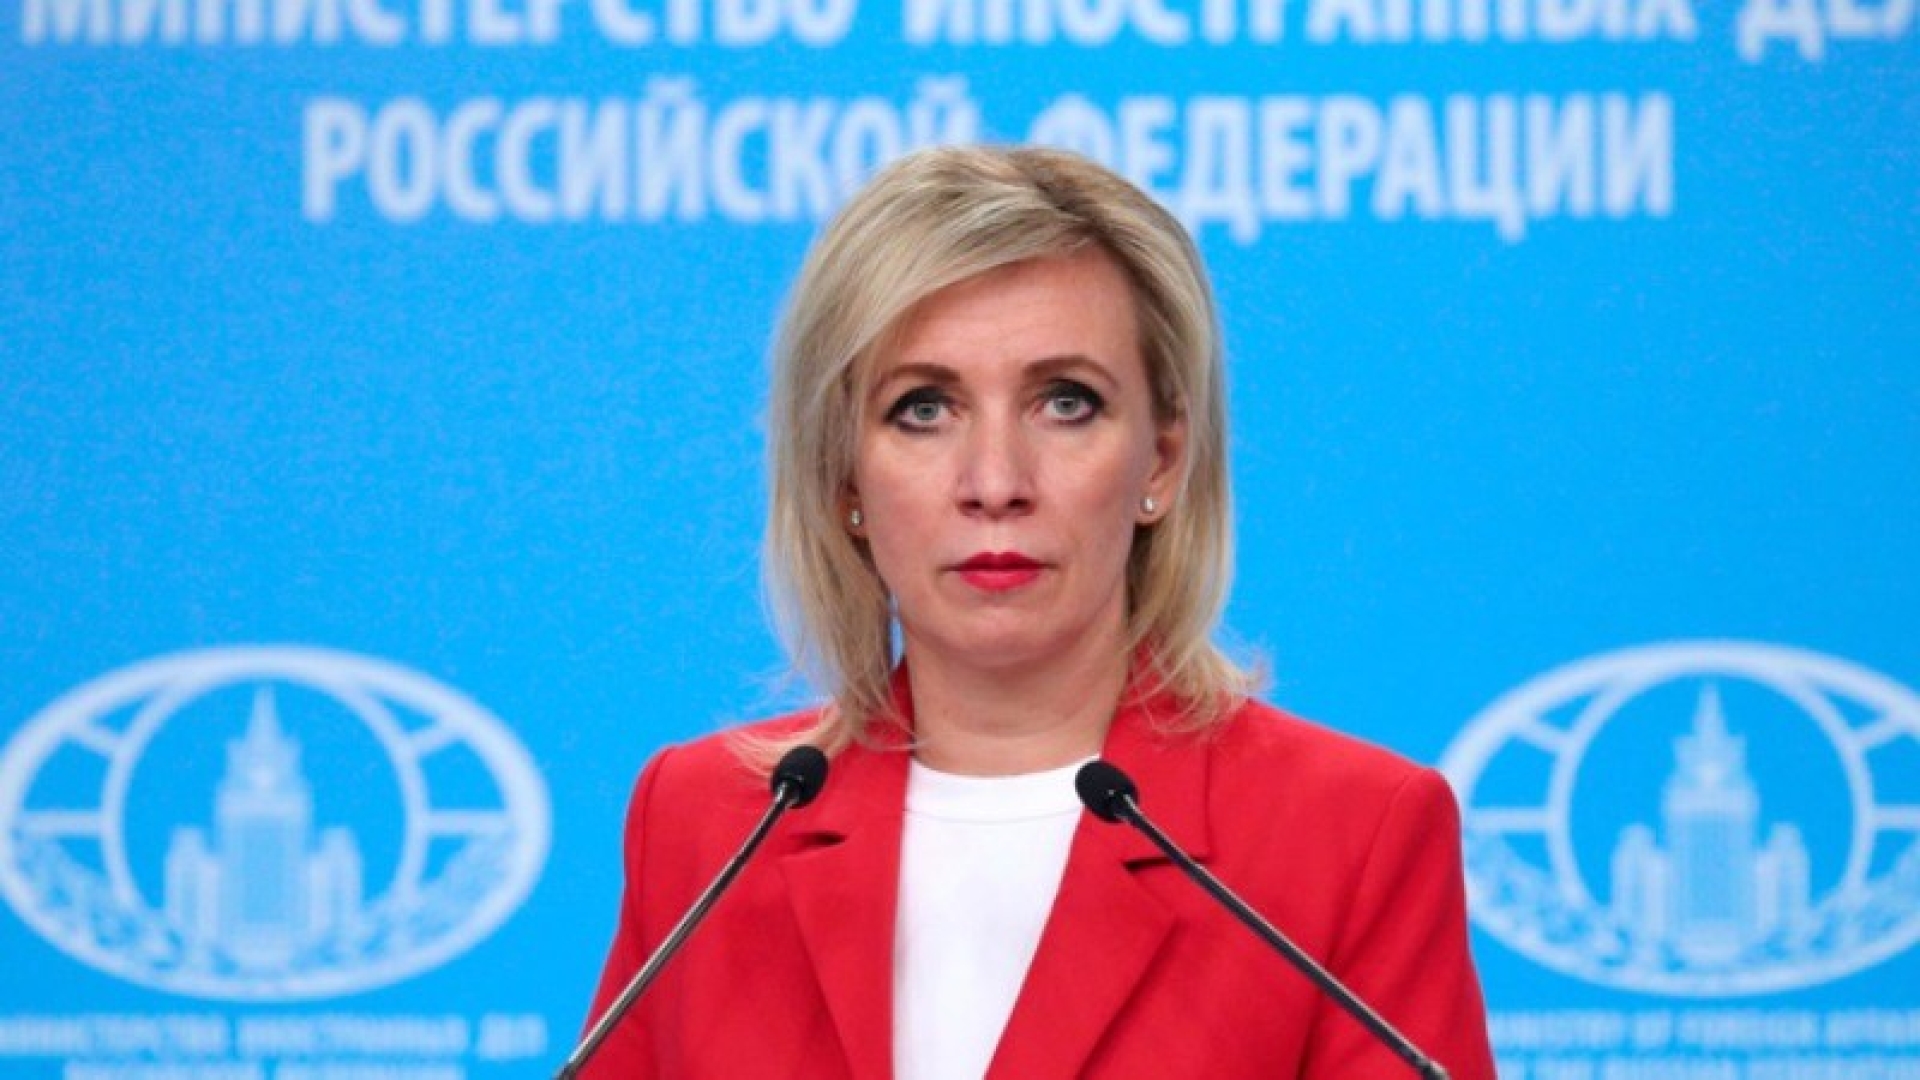 Zakharova: "It is impossible to remain silent, it is not just counterproductive, it is dangerous"